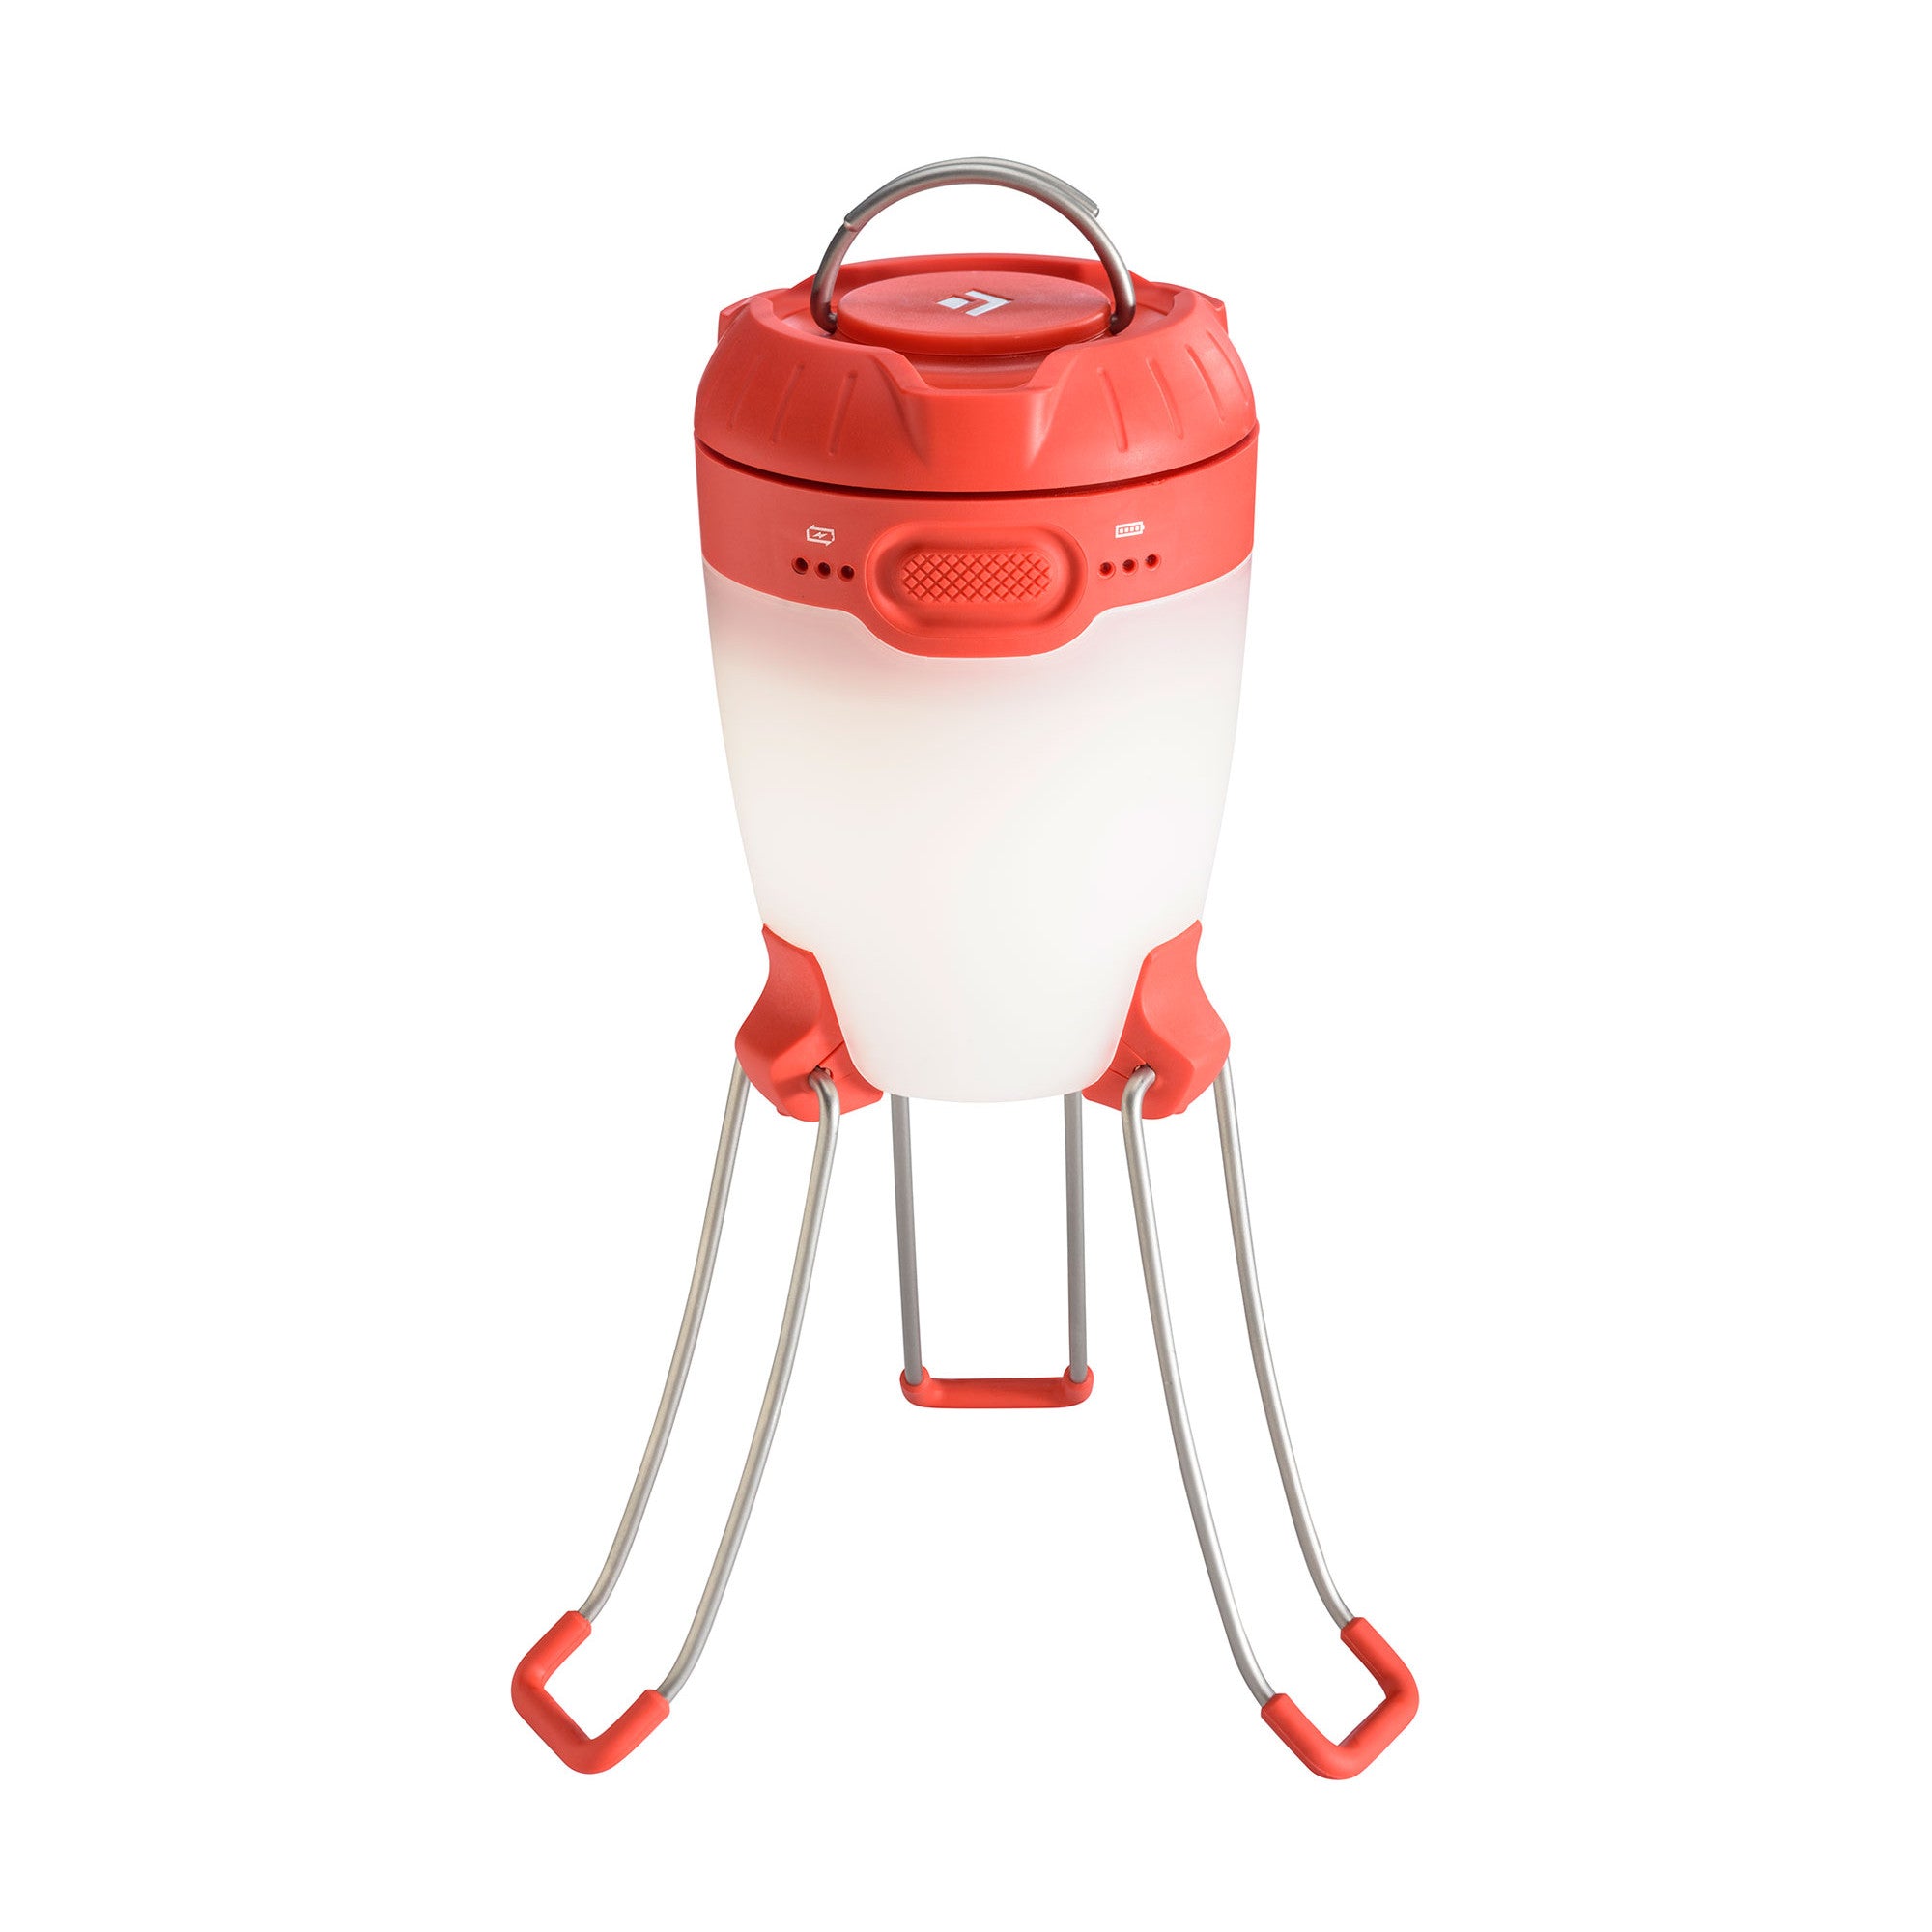 Black Diamond Apollo camping lantern, shown stood up on legs in red and white colours